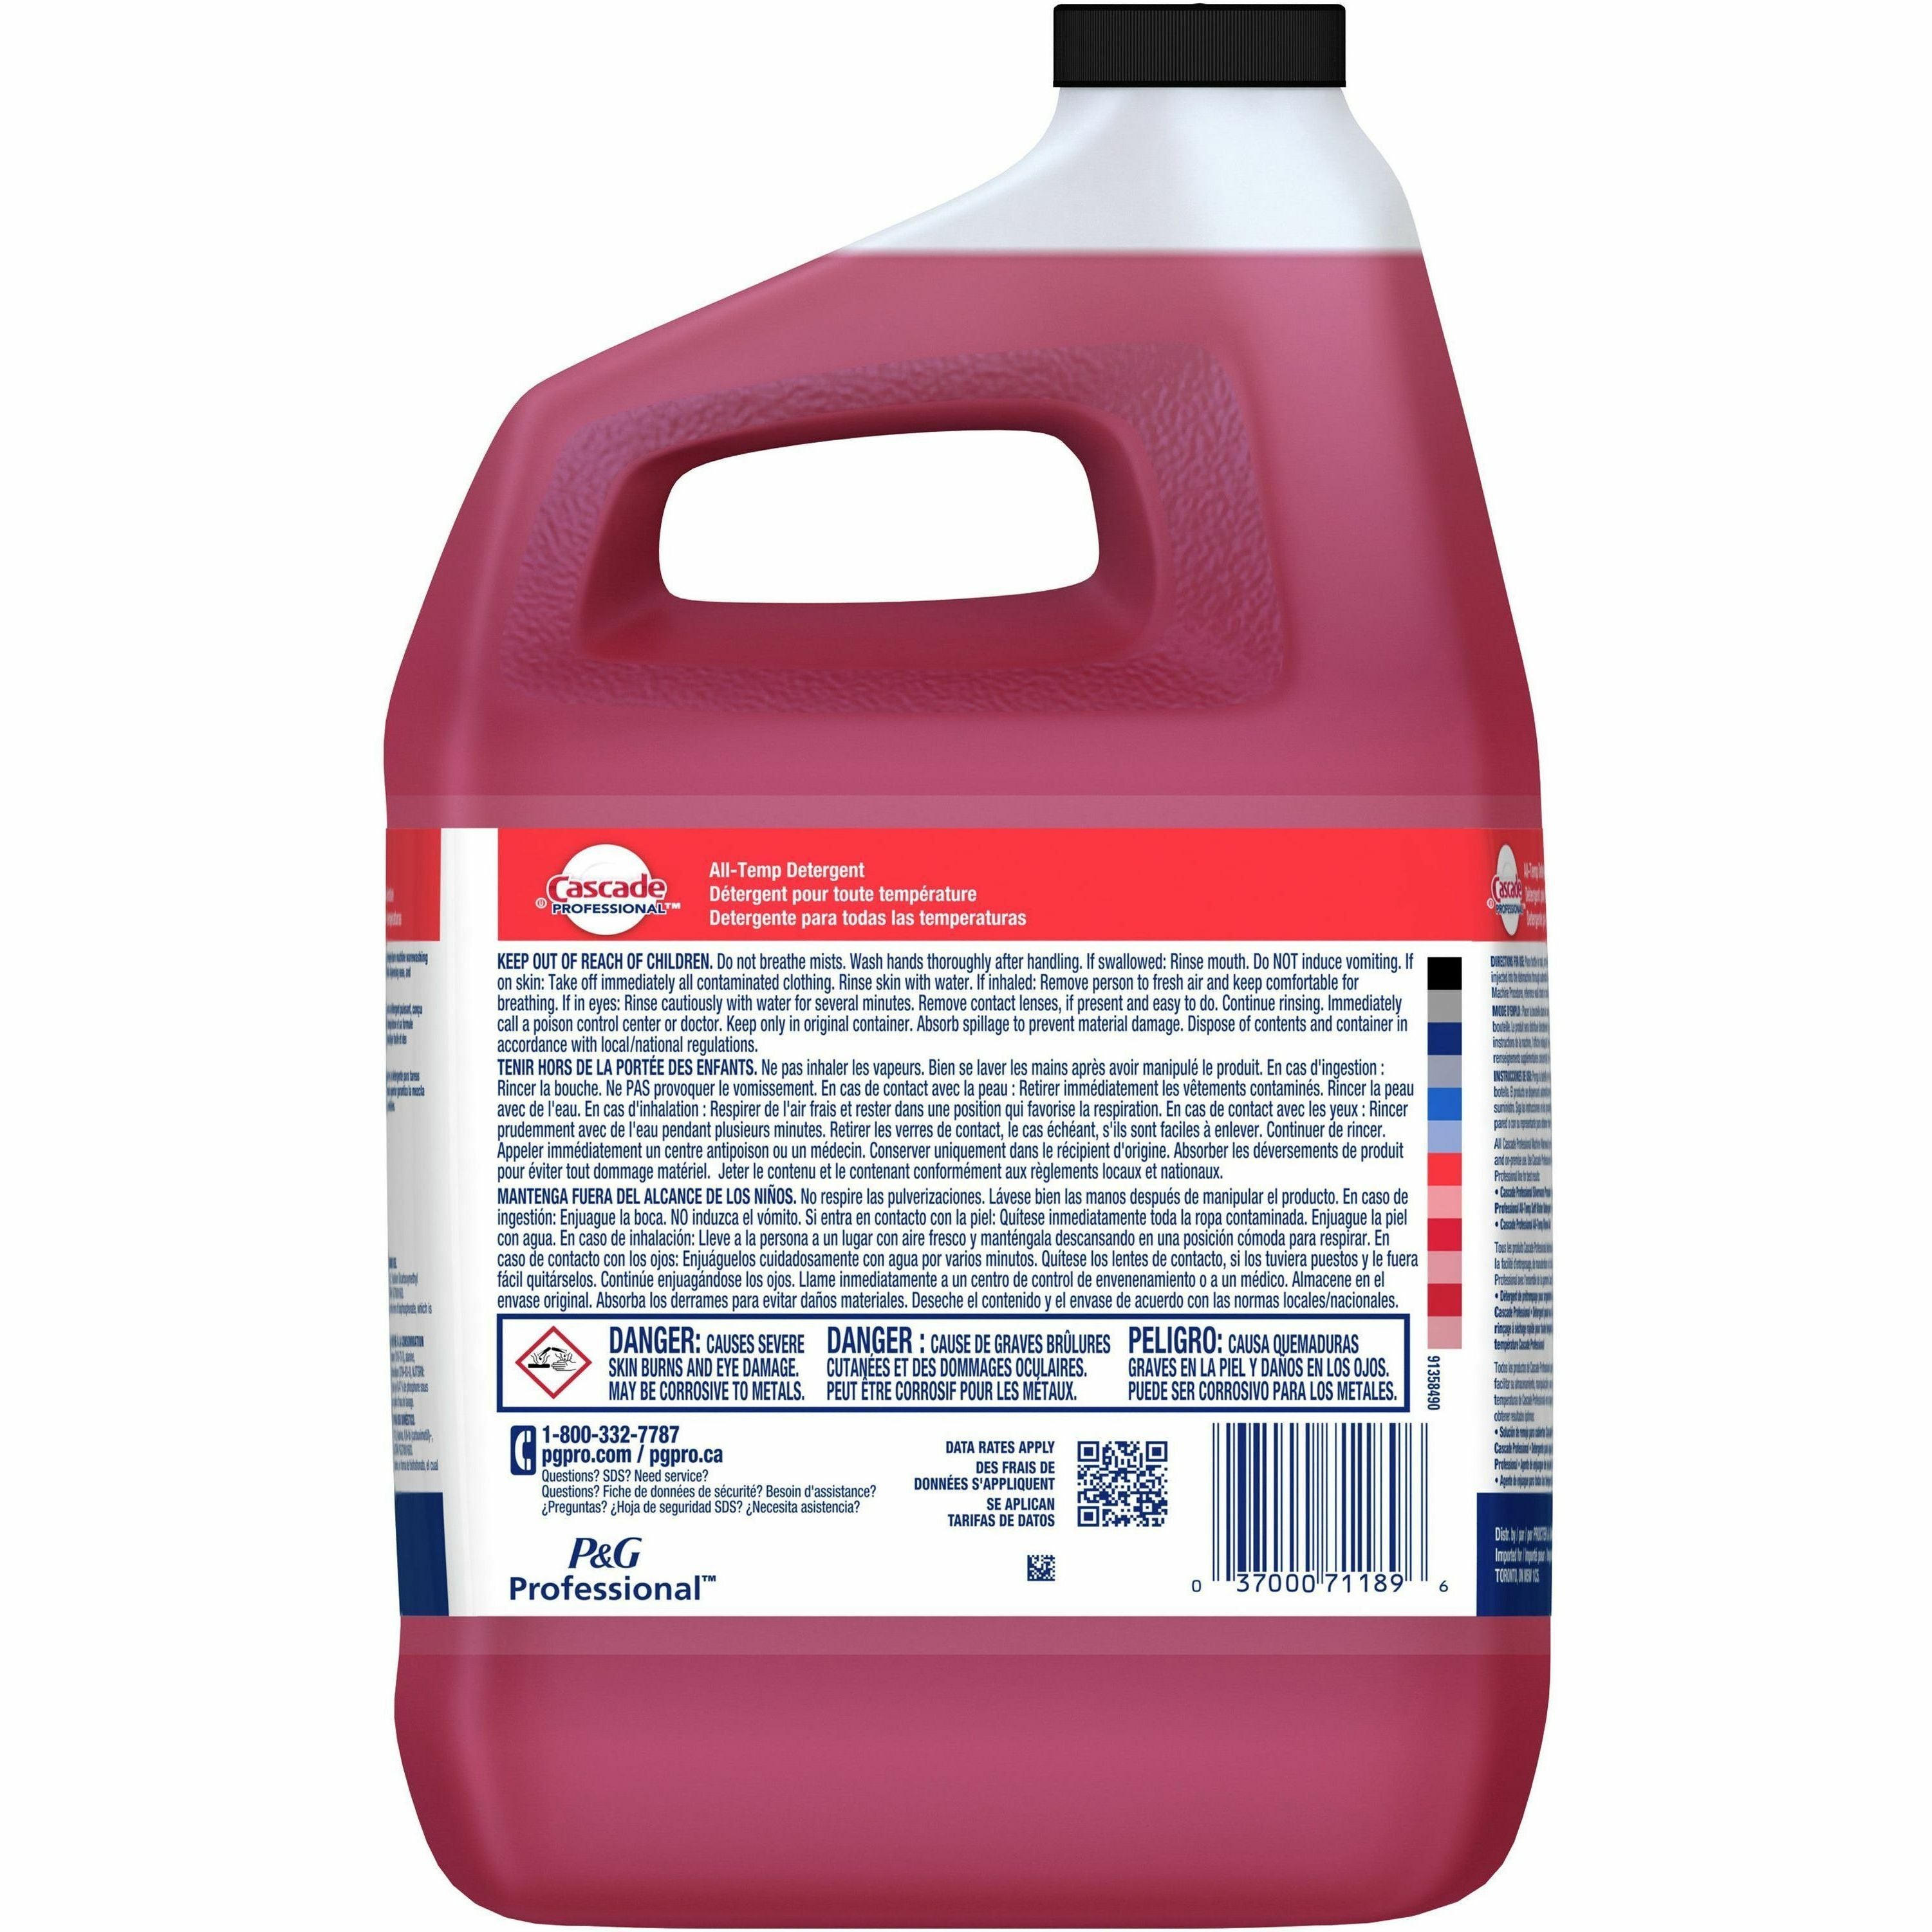 p&g-all-temp-detergent-for-dish-concentrate-liquid-128-fl-oz-4-quart-2-carton-phthalate-free-triclosan-free-alkylphenol-free-anti-limescale-heavy-duty-red_pgc71189 - 2